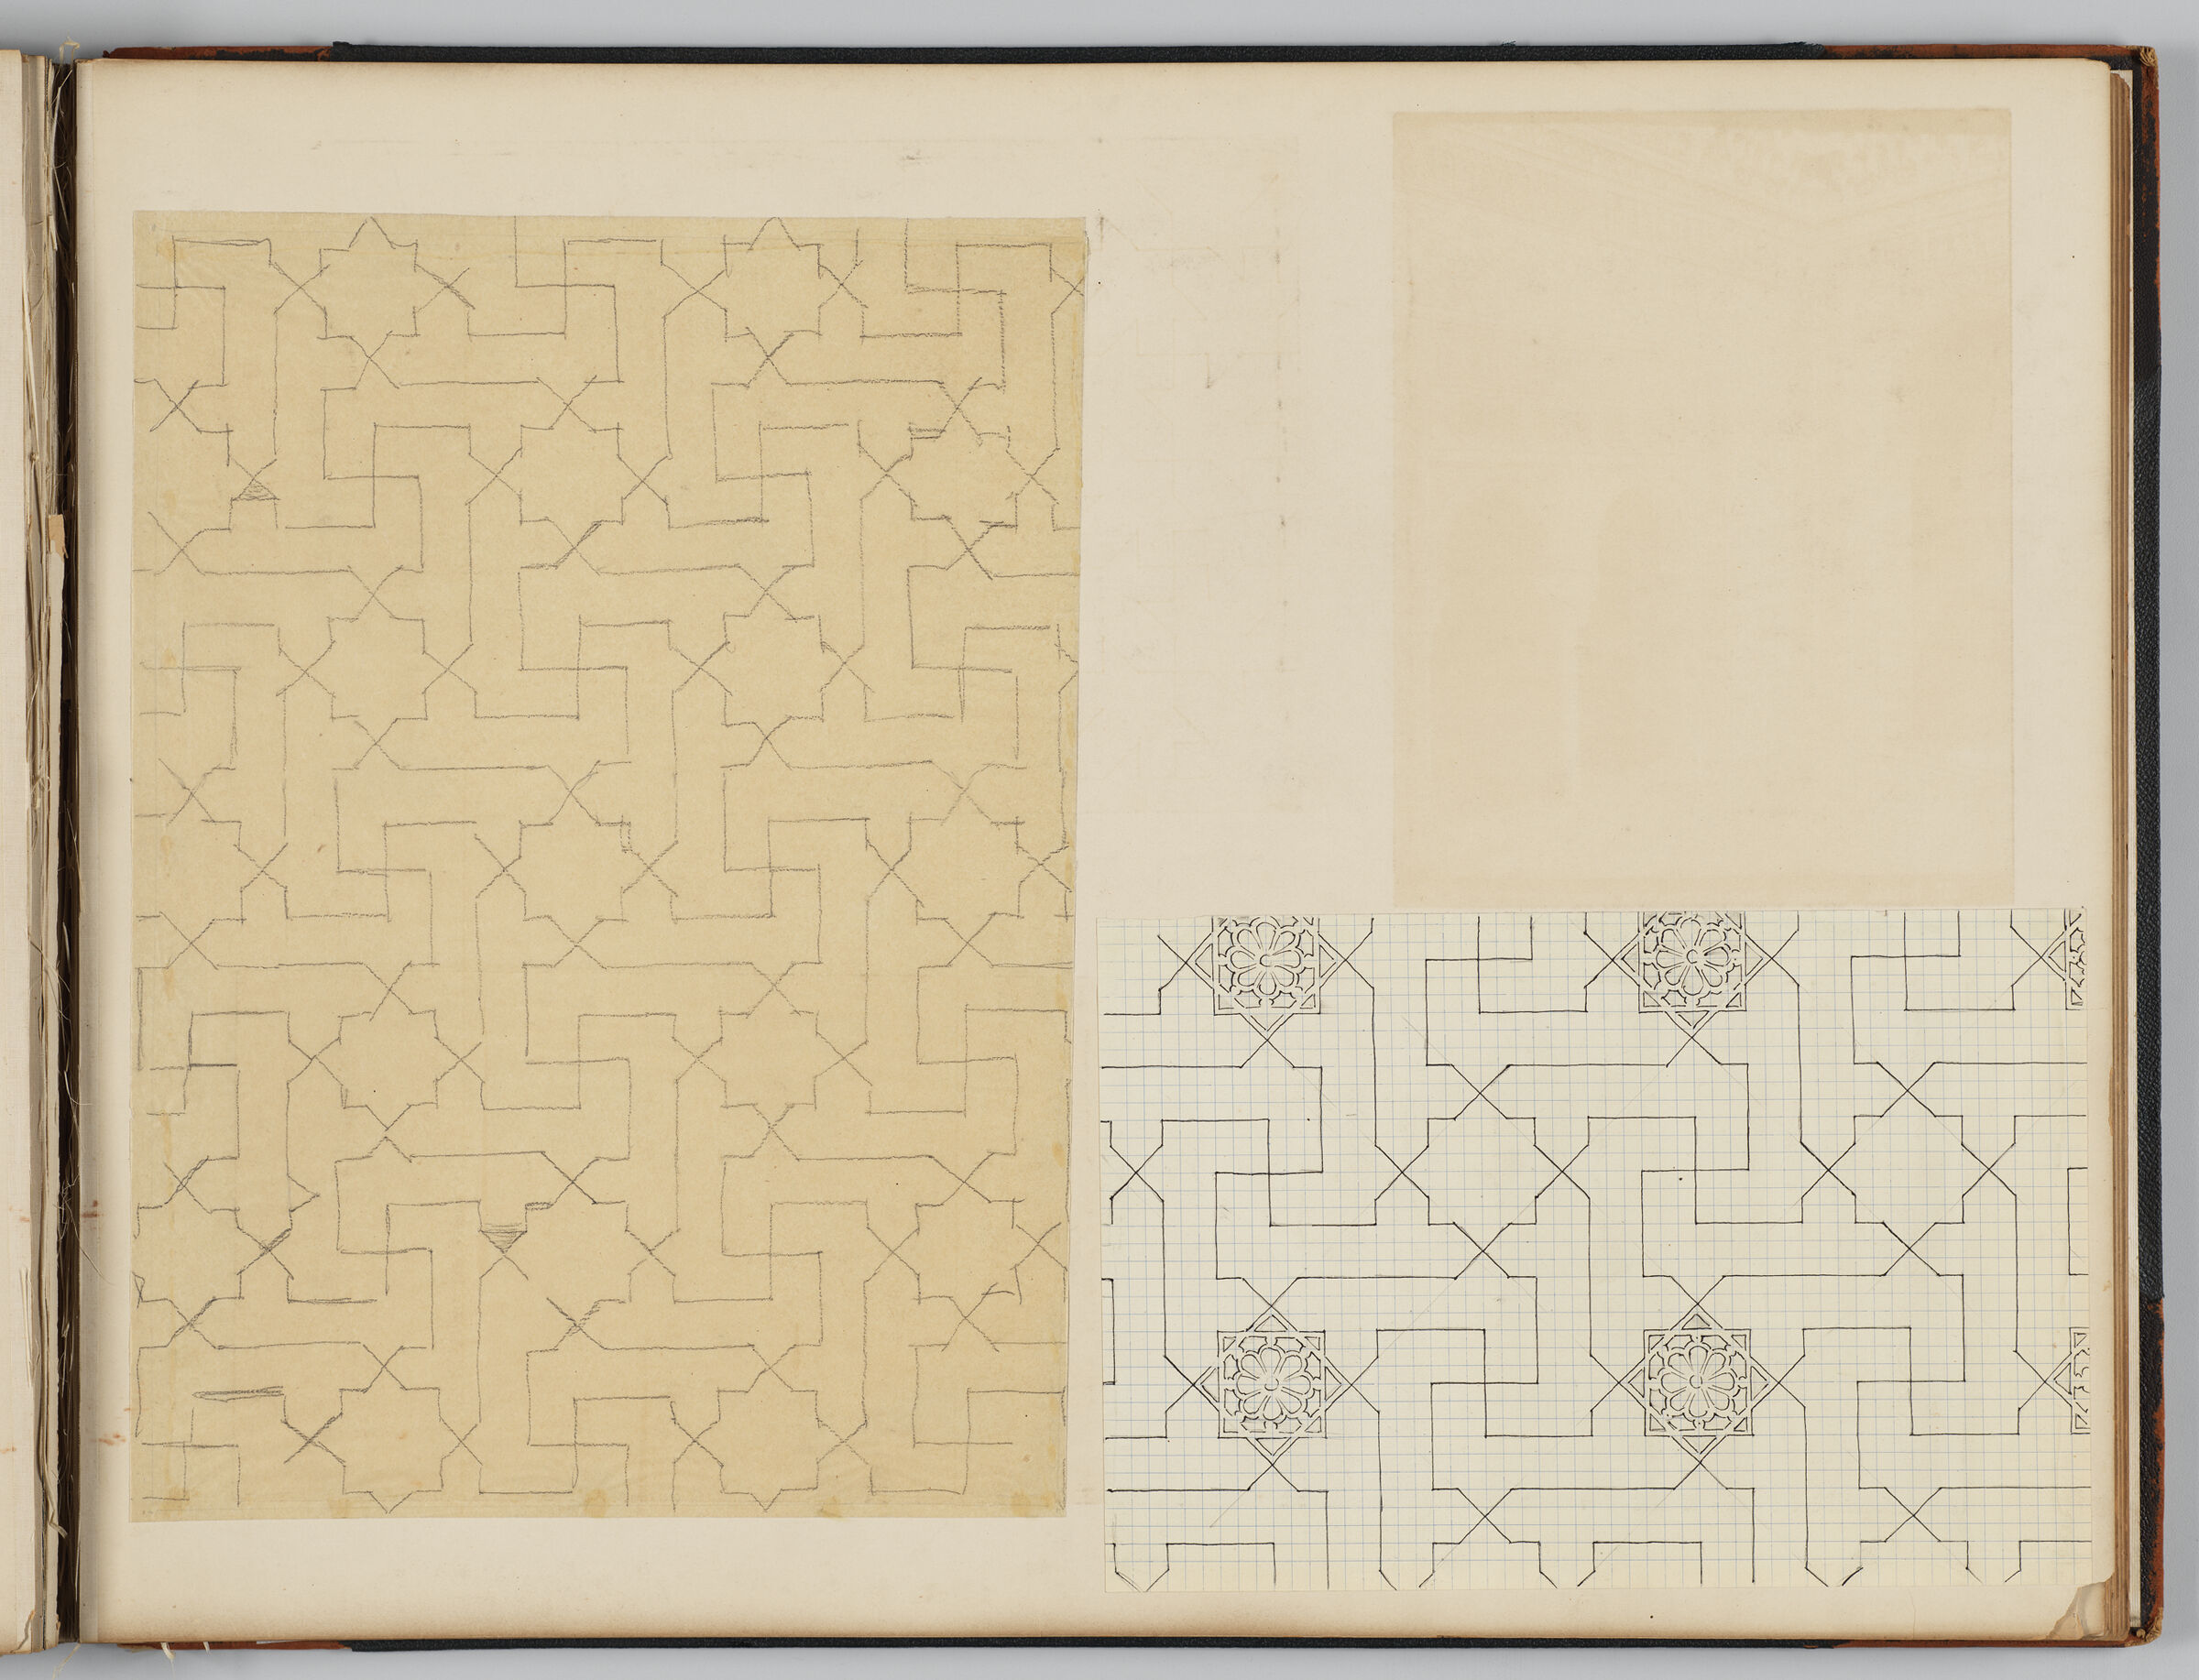 Album Leaf With Two Drawings; Verso: Album Leaf With Two Drawings